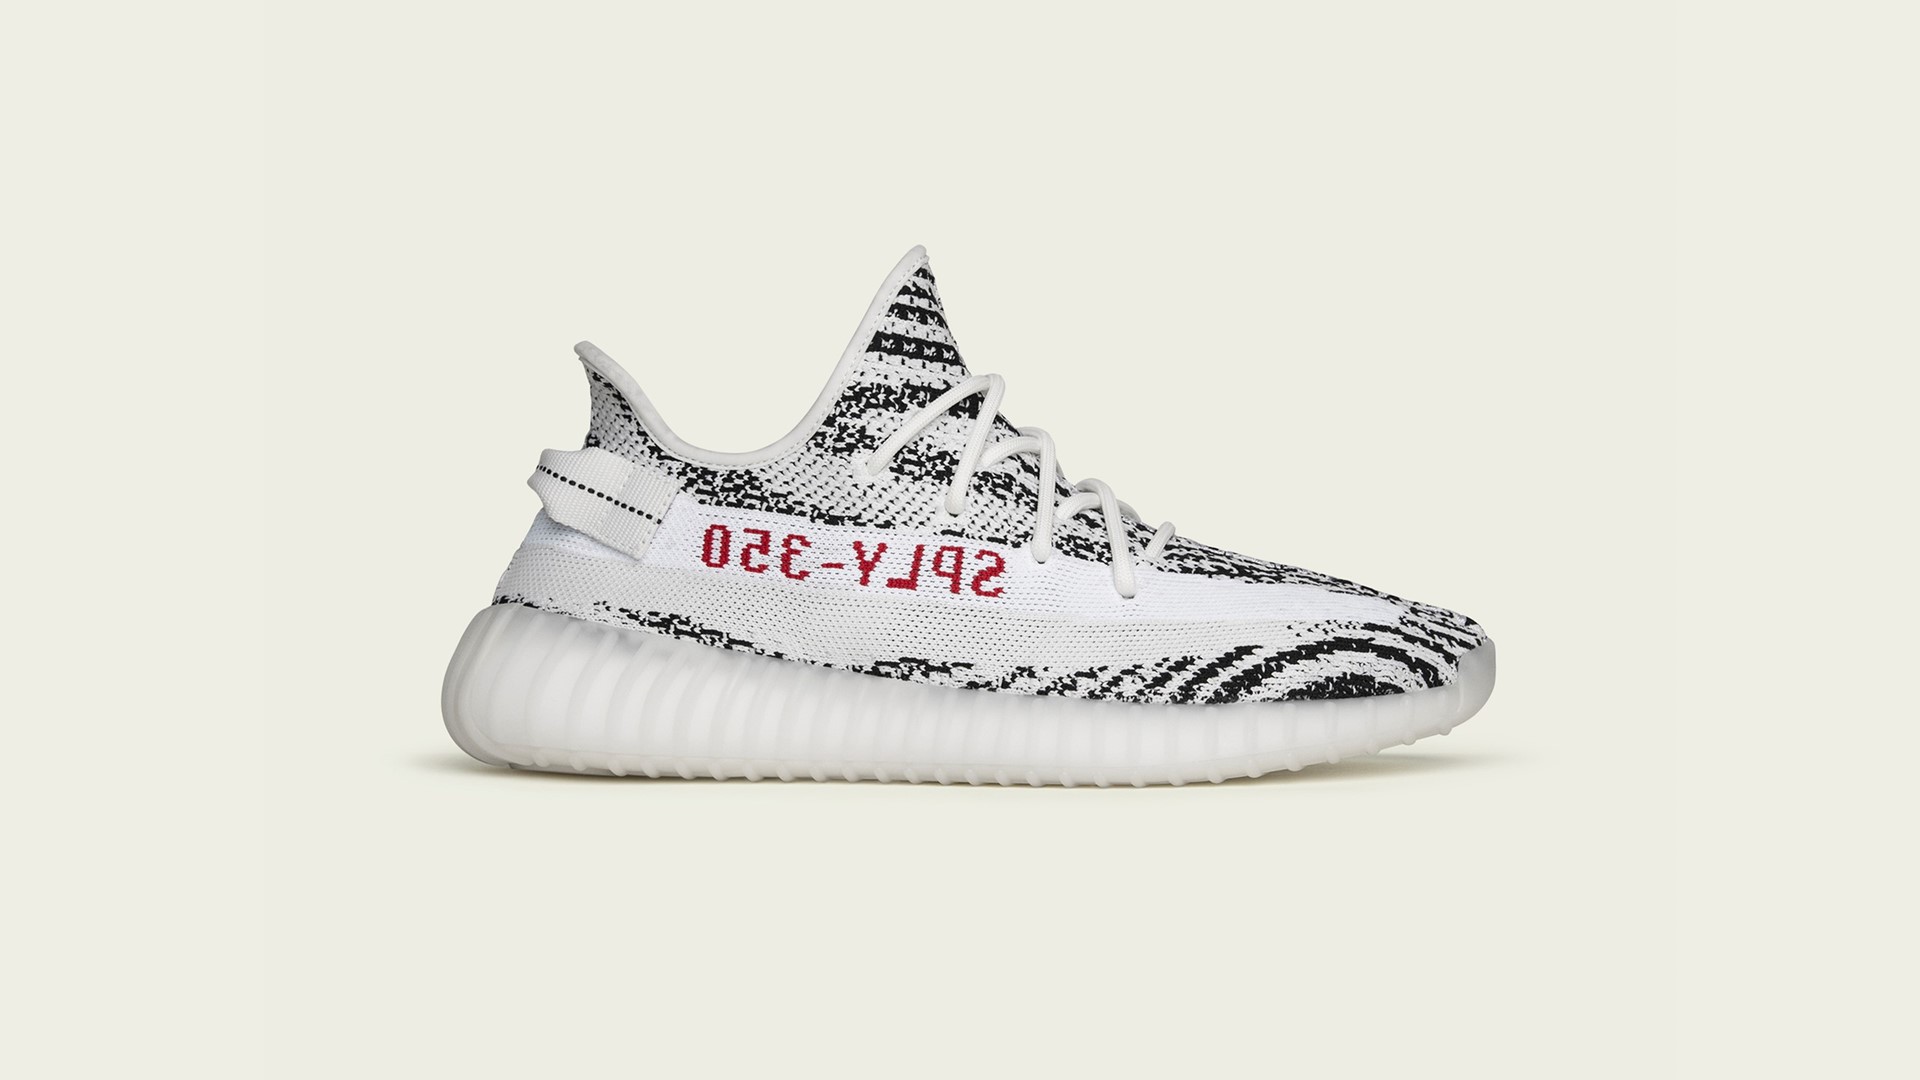 Risa En el piso Sin personal adidas + KANYE WEST announce the YEEZY BOOST 350 V2 White/Core Black/Red